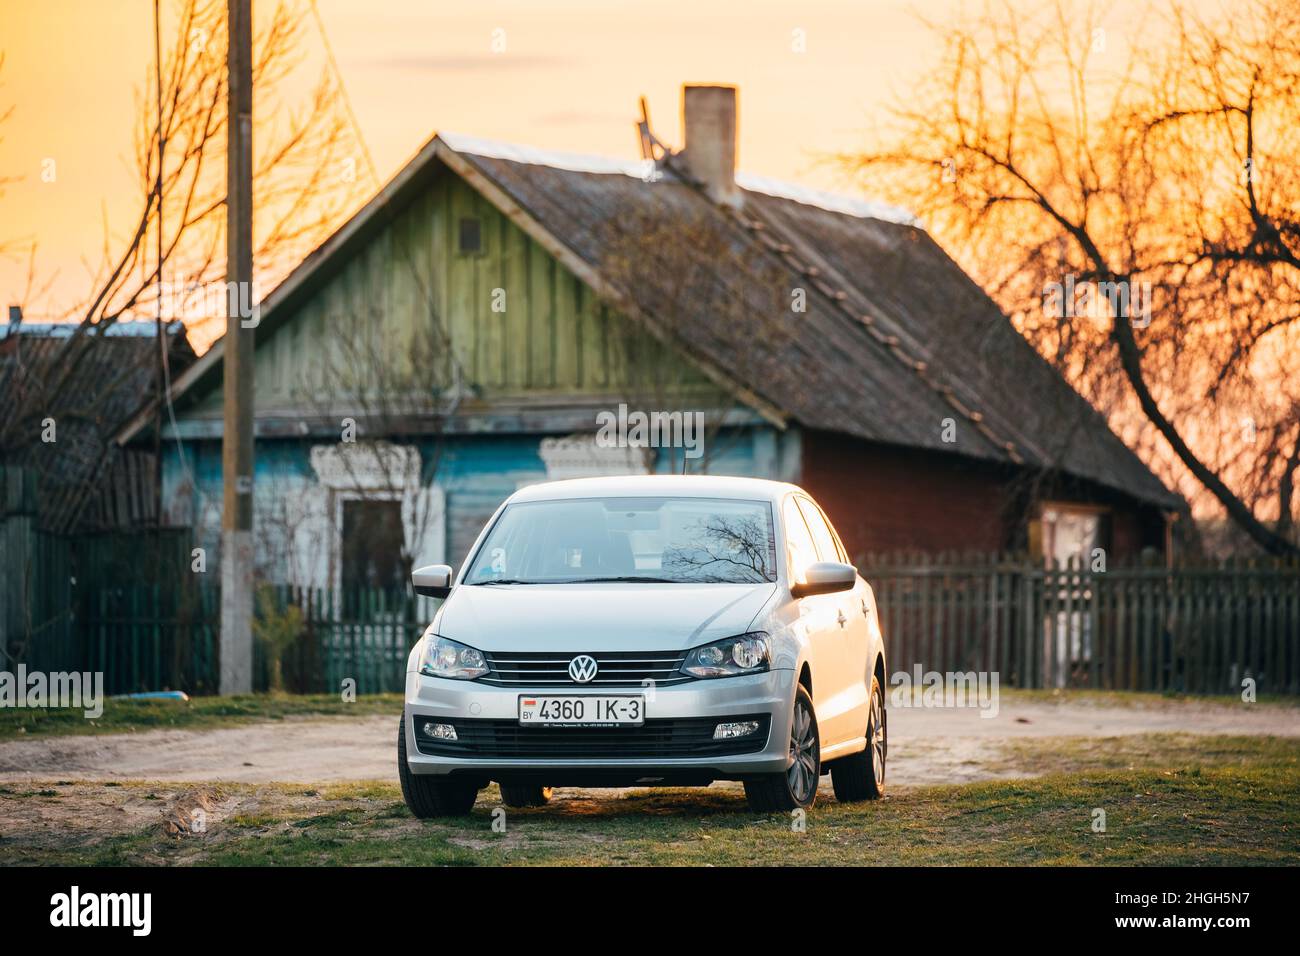 Volkswagen Polo Car Parking On Country Road On A Background Of Traditional Old Wooden Village House In Sunny Evening Stock Photo